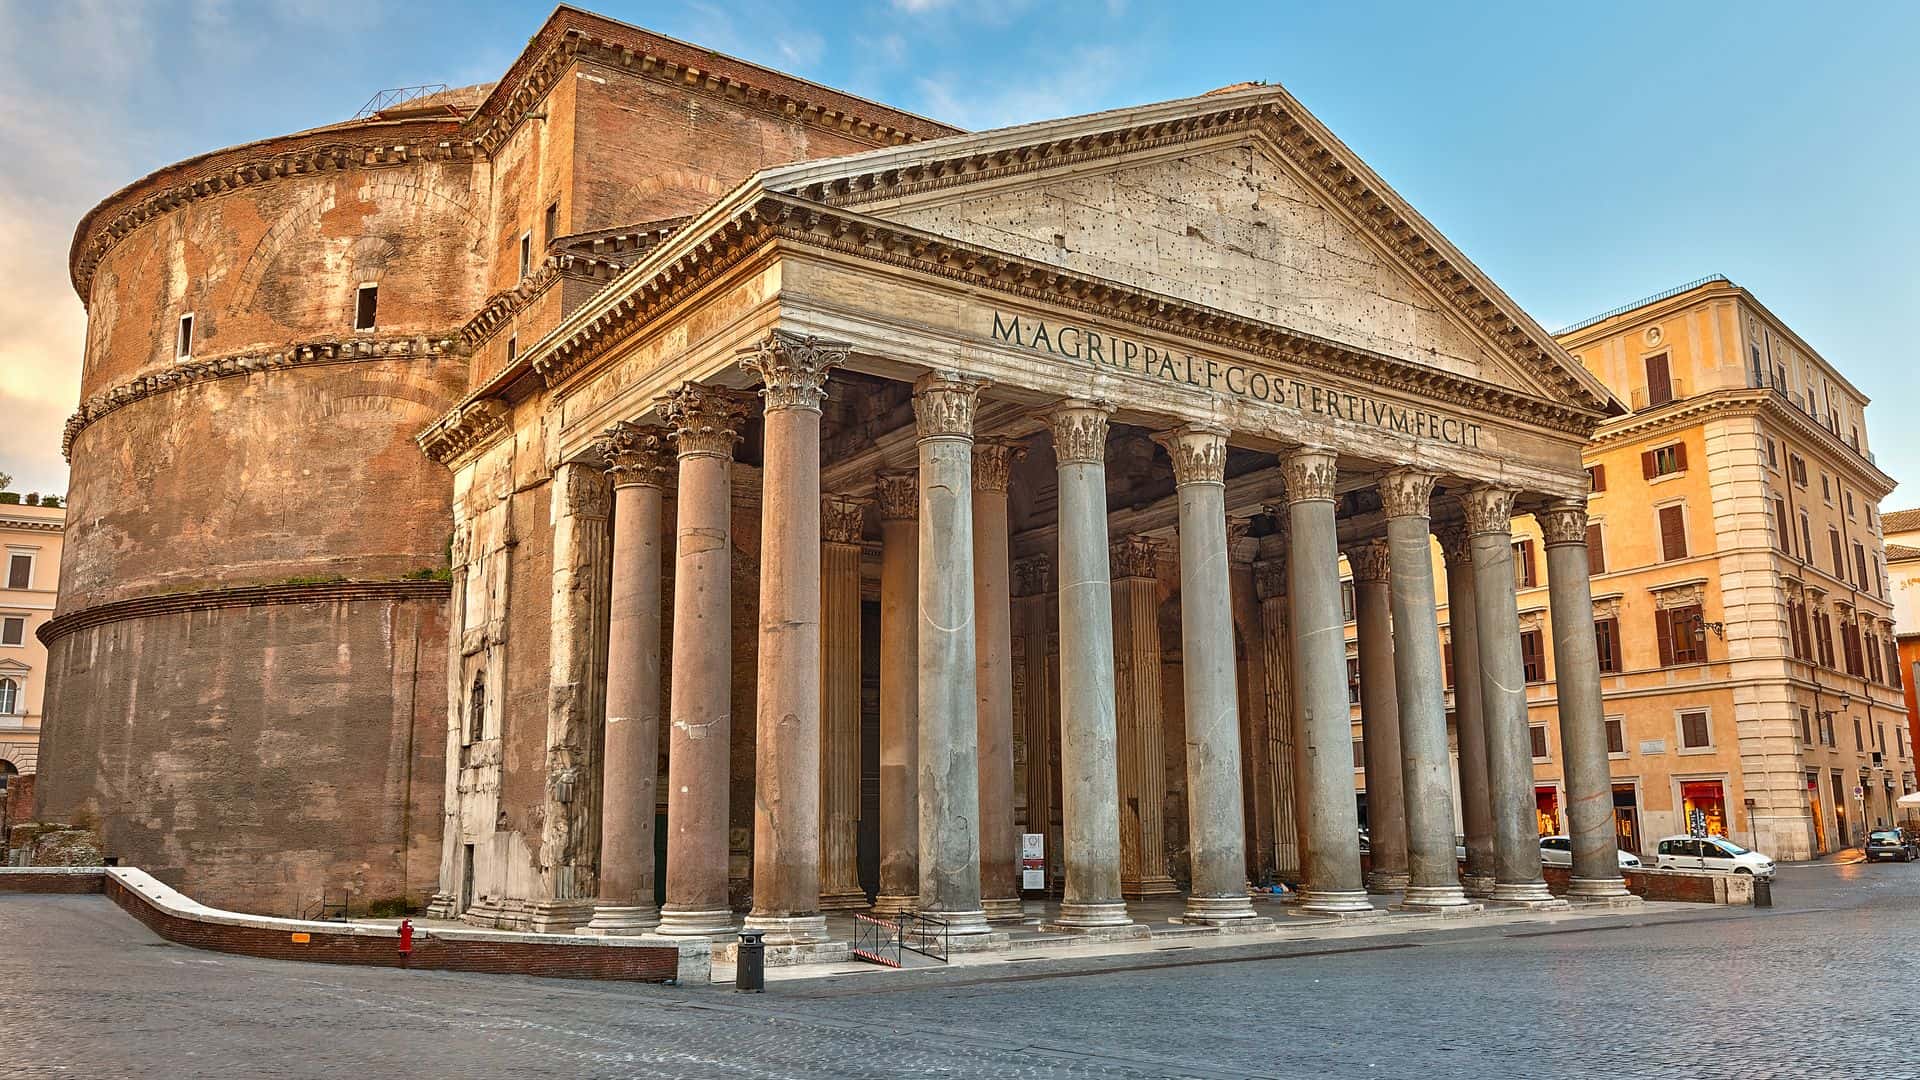 The entrance of the Pantheon in Rome